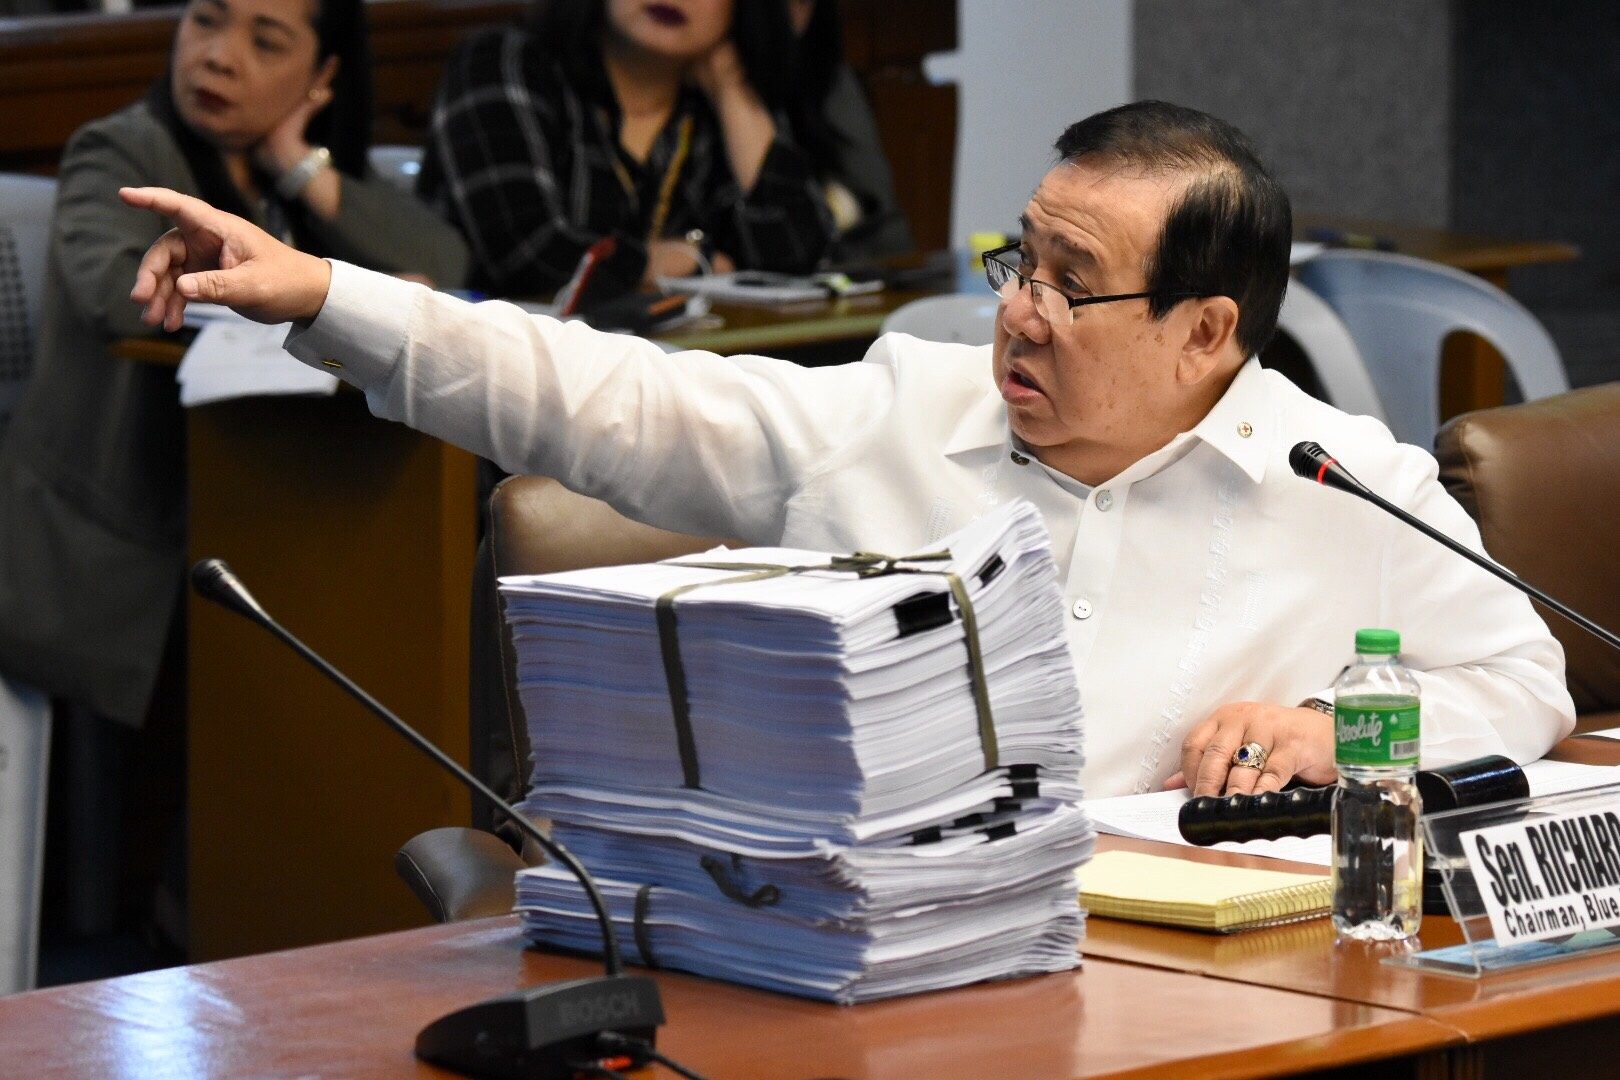 Senate reprimands Aguirre for private meeting with Jack Lam